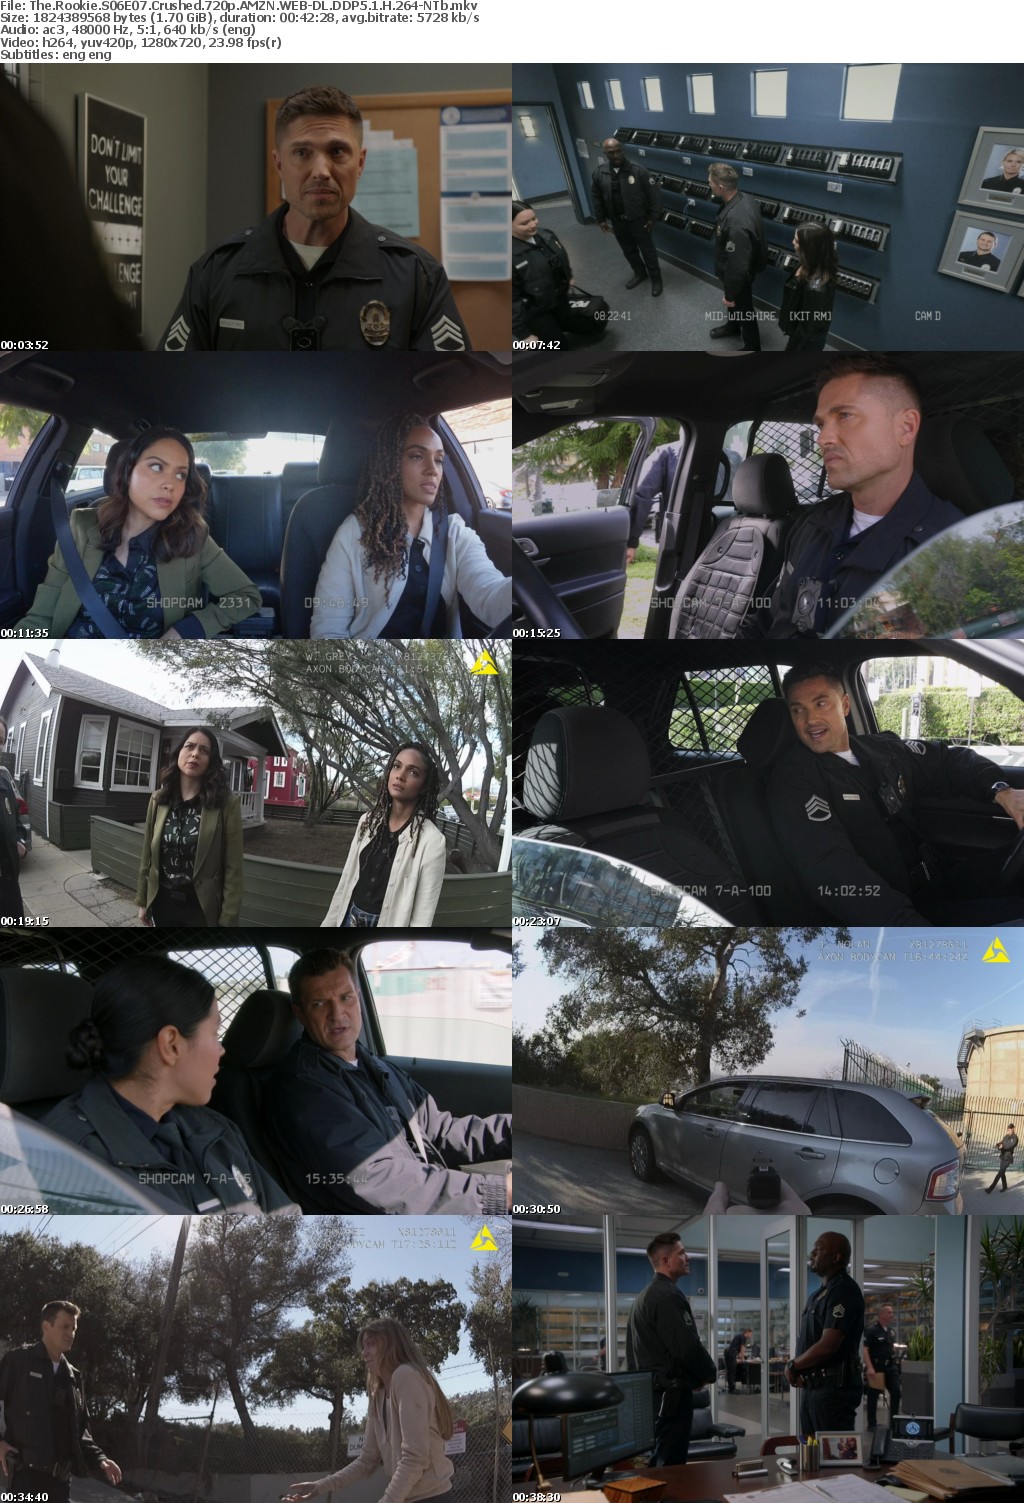 The Rookie S06E07 Crushed 720p AMZN WEB-DL DDP5 1 H 264-NTb